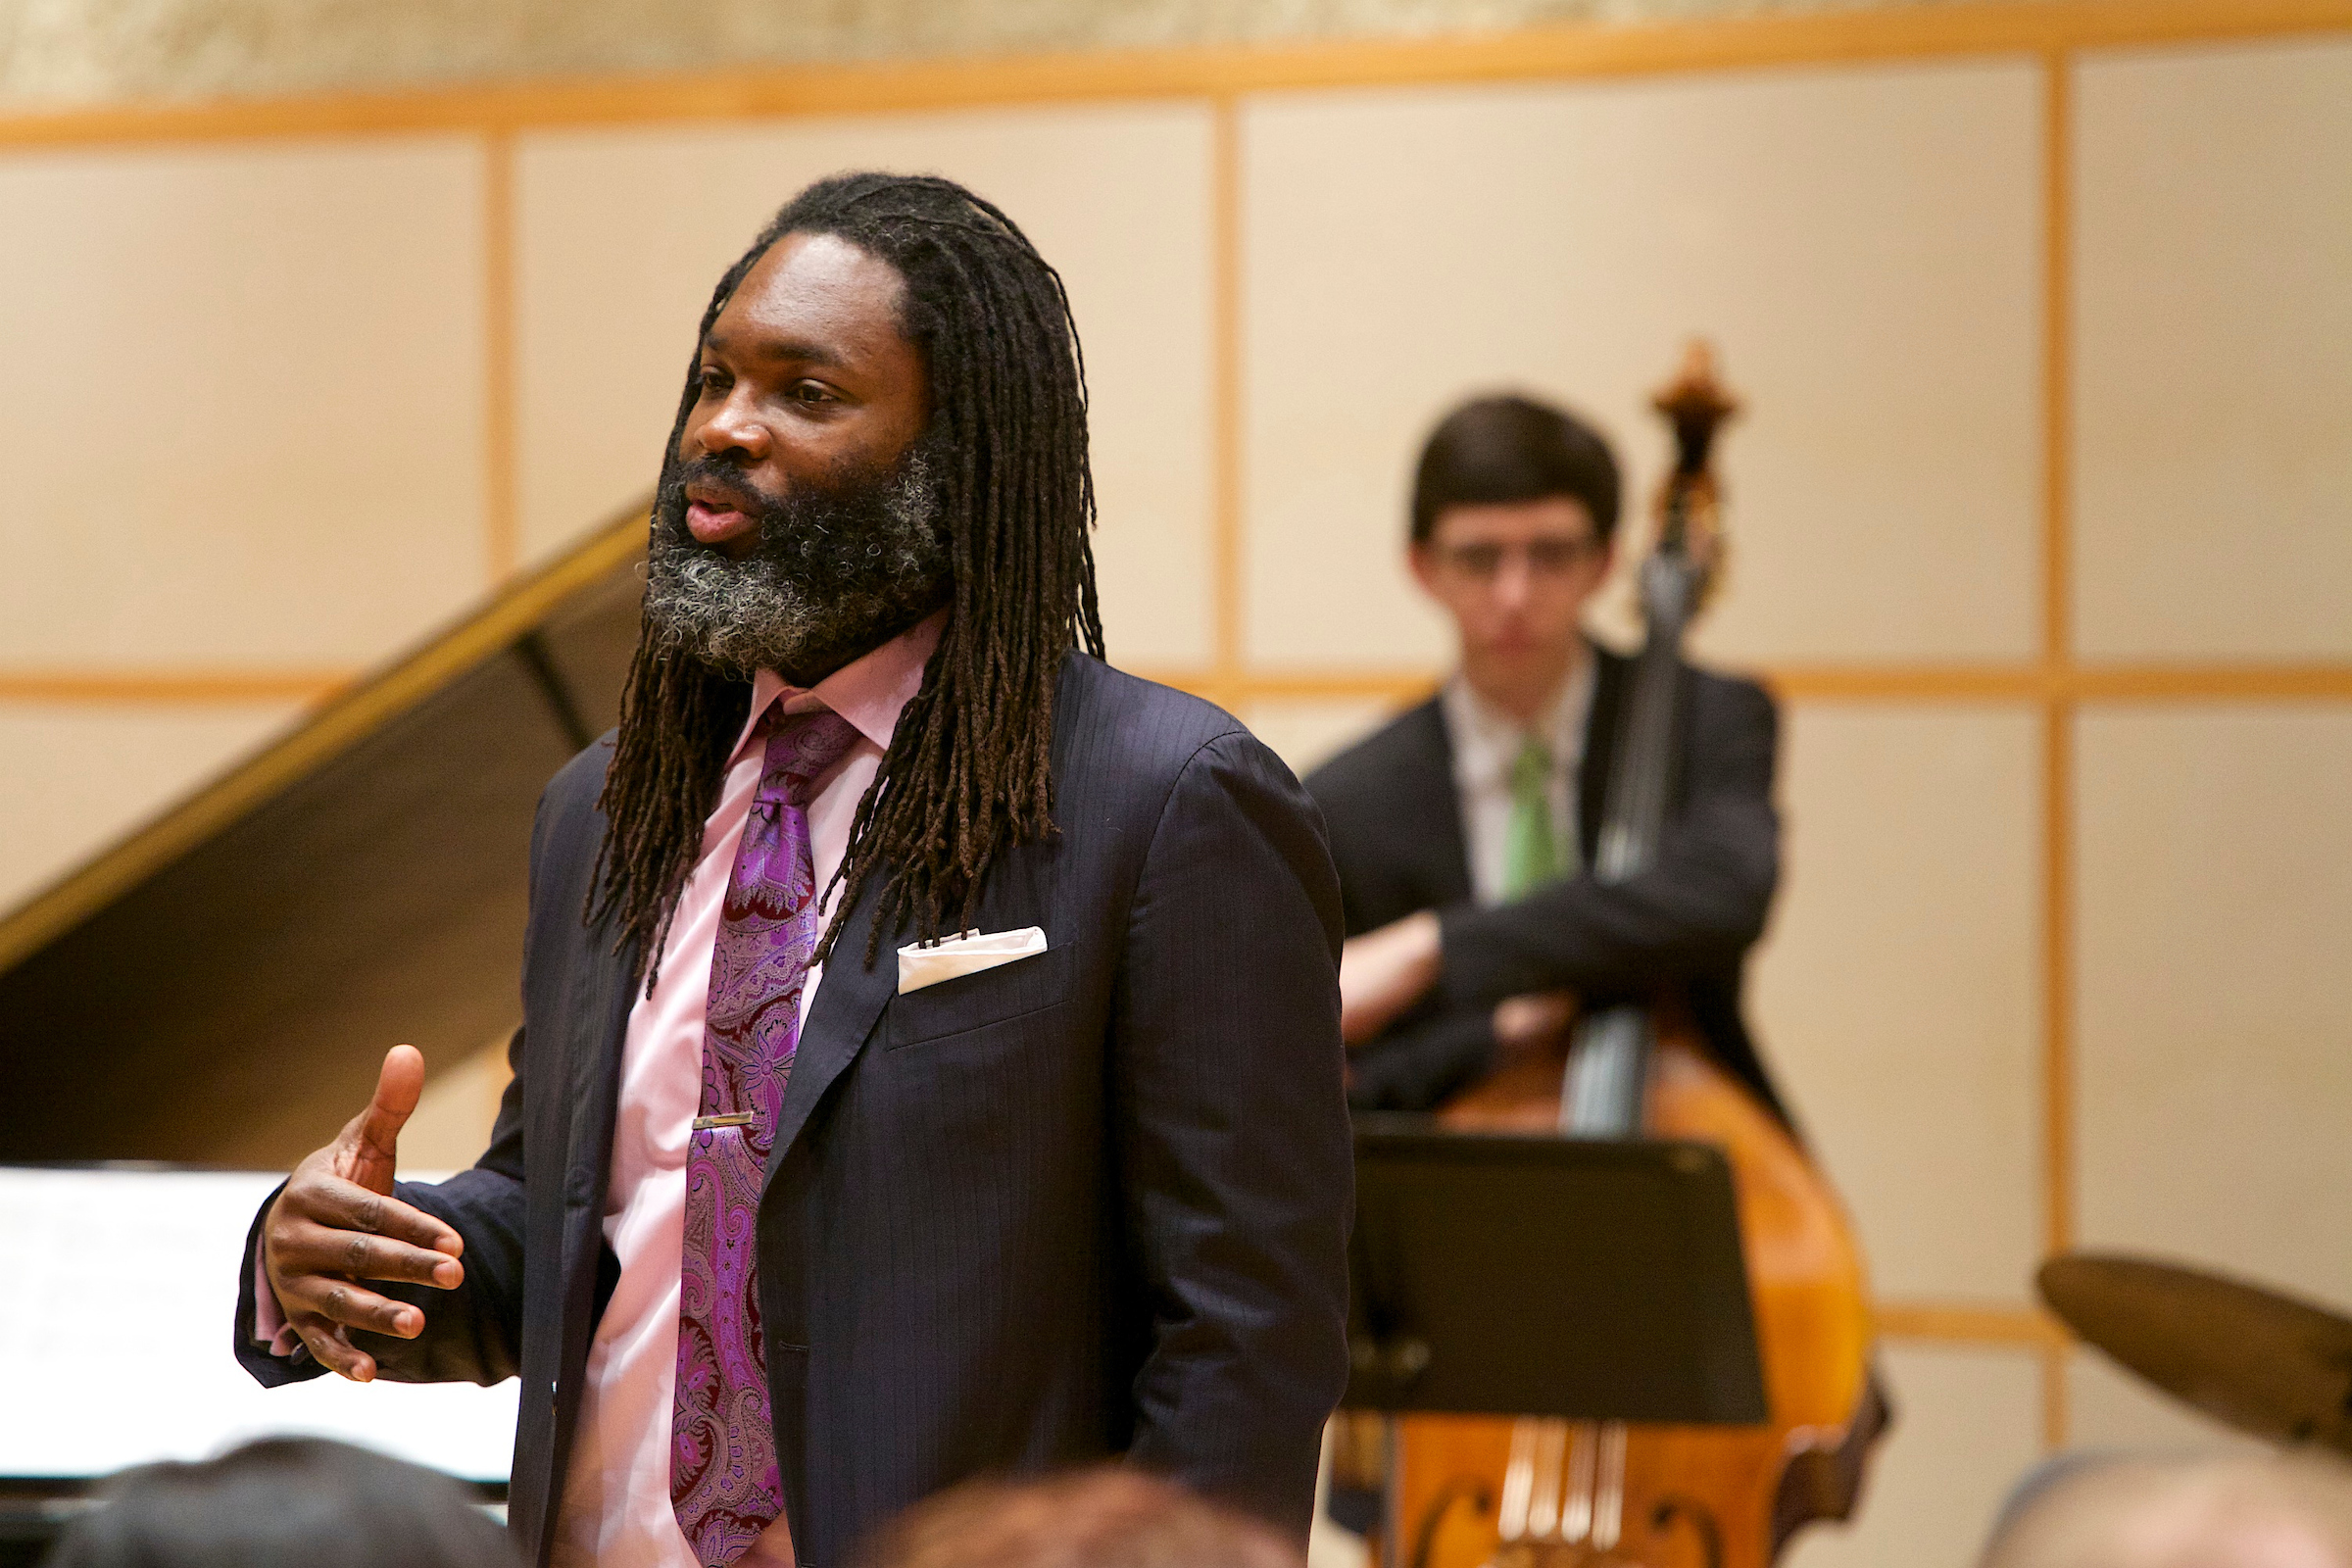 Dana Hall will begin his appointment as interim dean of the School of Music on Nov. 2.